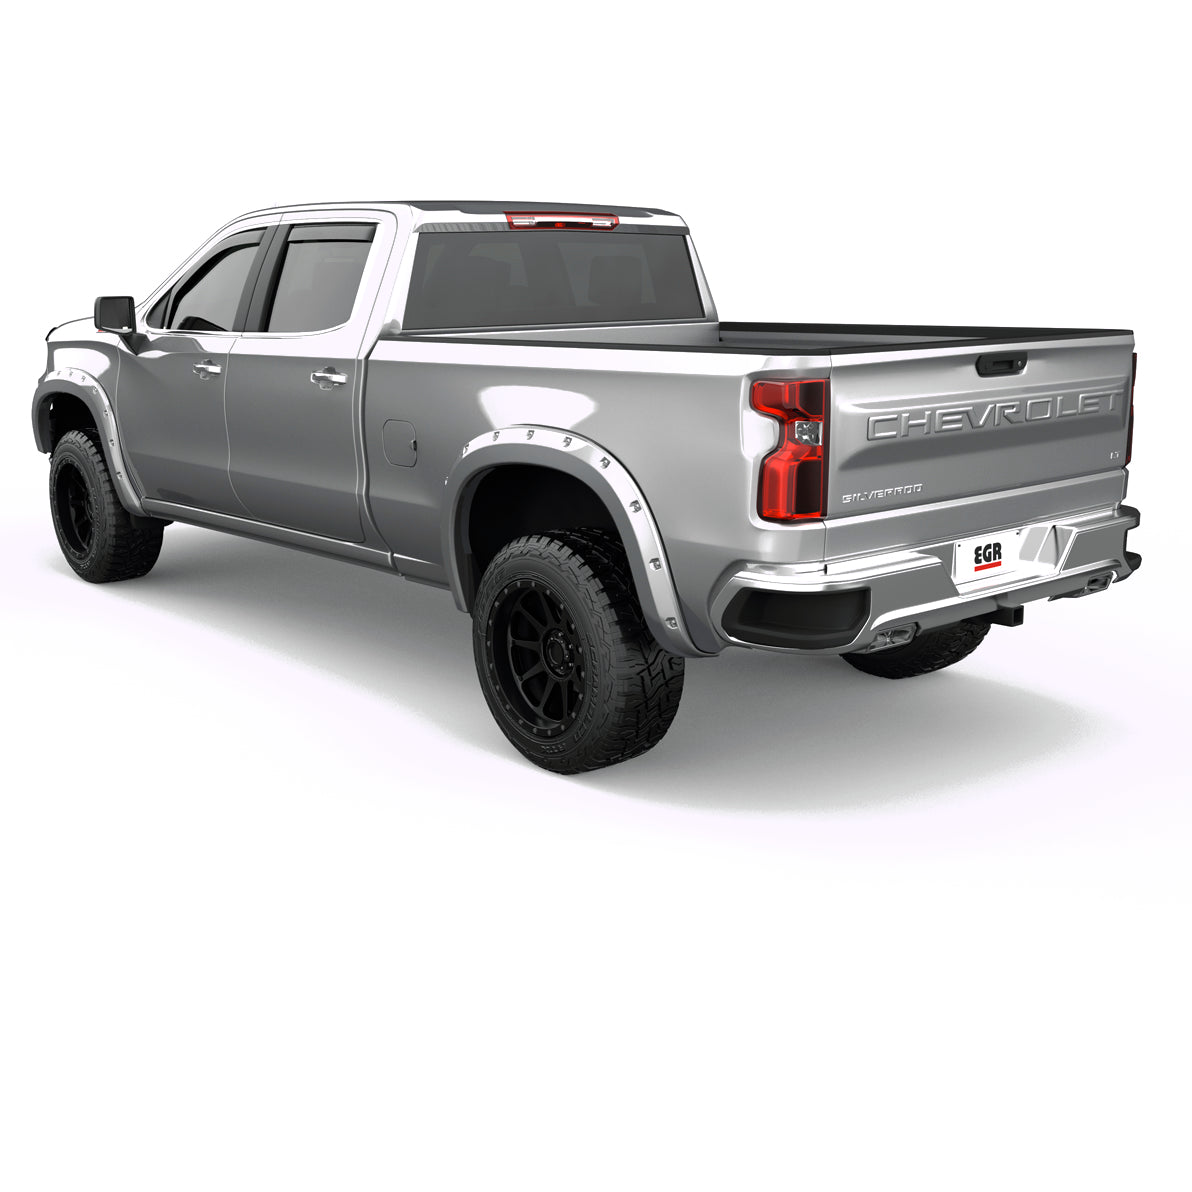 EGR Traditional Bolt-on look Fender Flares 19-22 Chevrolet Silverado 1500 Painted to Code Silver Metallic set of 4